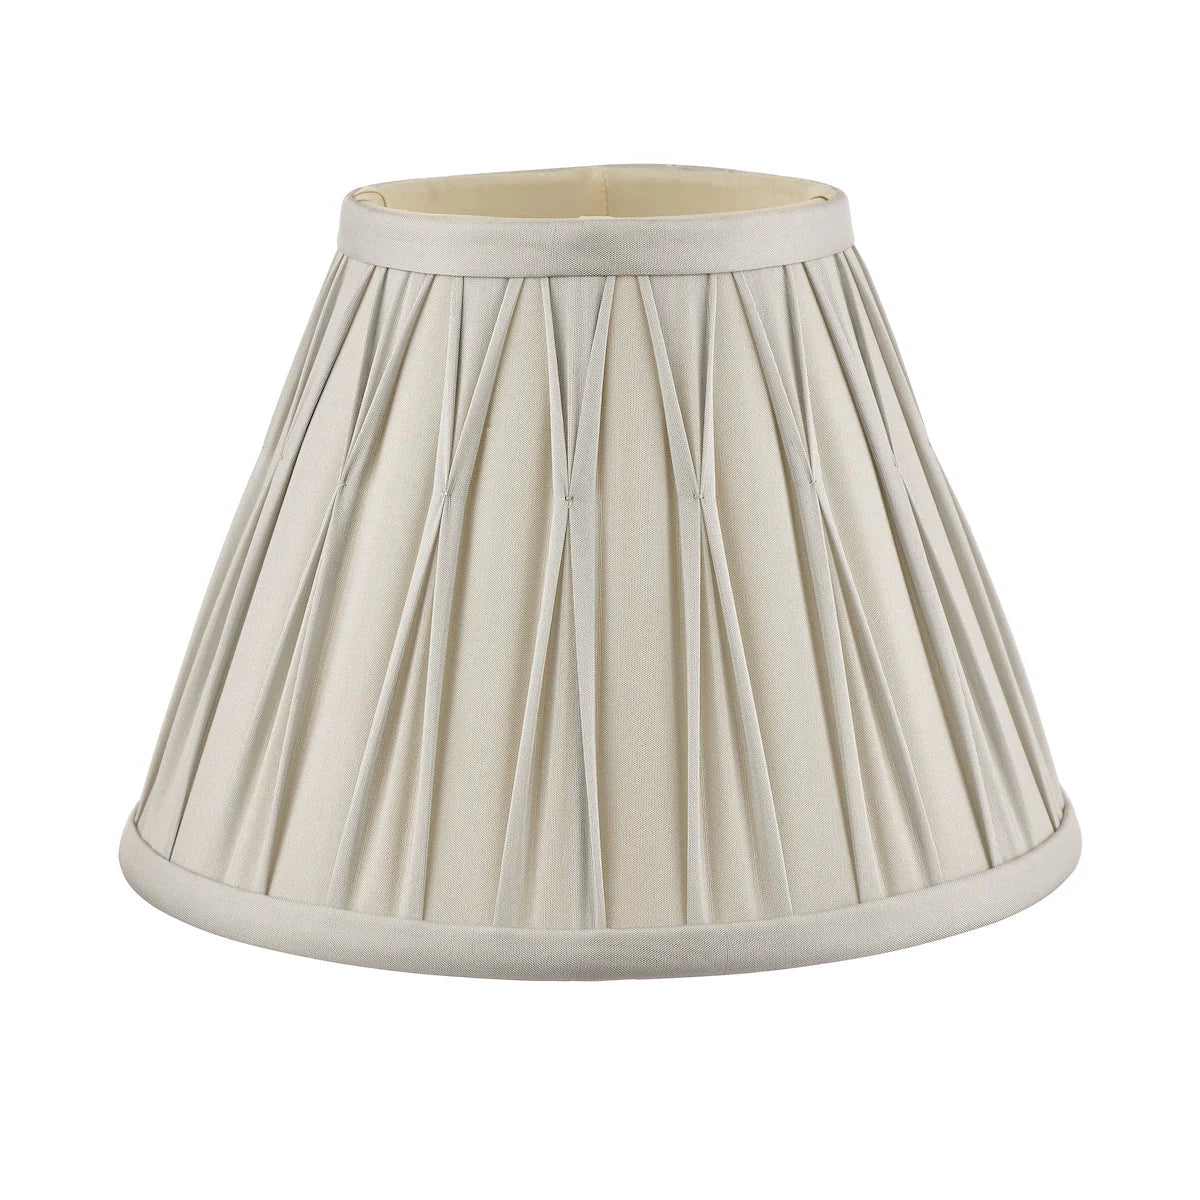 Elegant-fabric-light-shade-in-soft-beige,-perfect-for-classic-living-room-decor